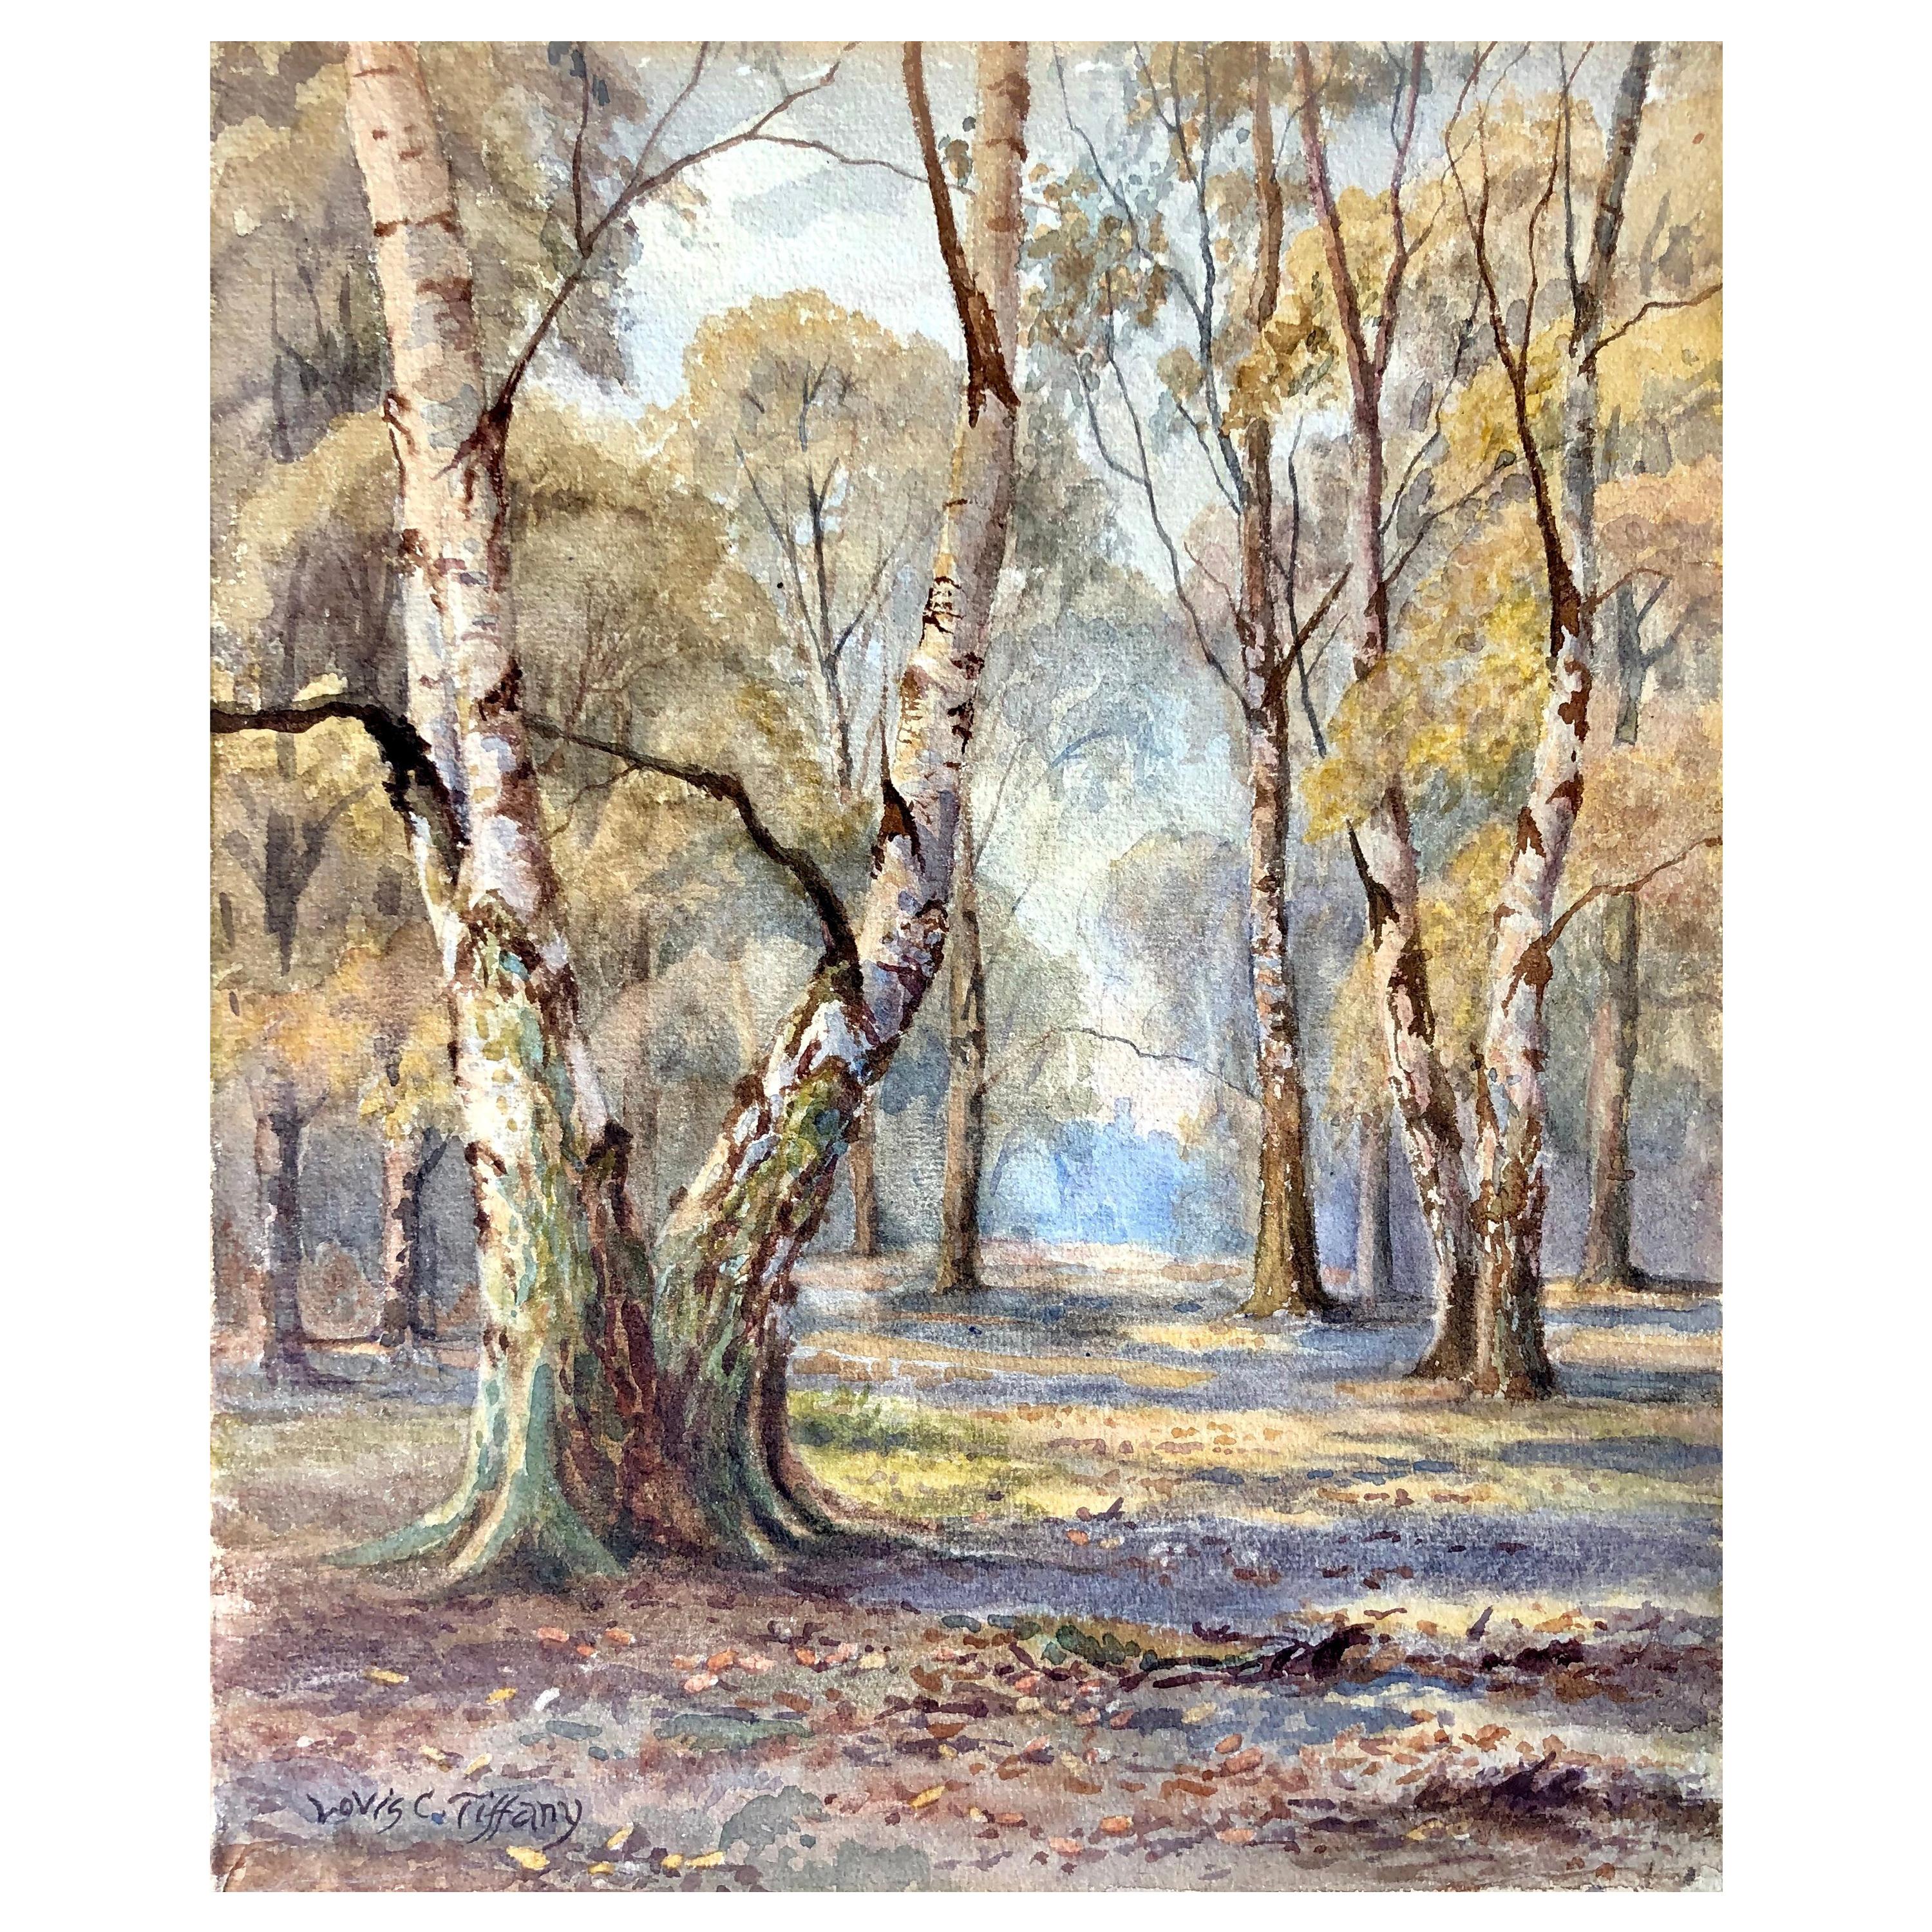 "Springtime in the Forest" by Louis Comfort Tiffany